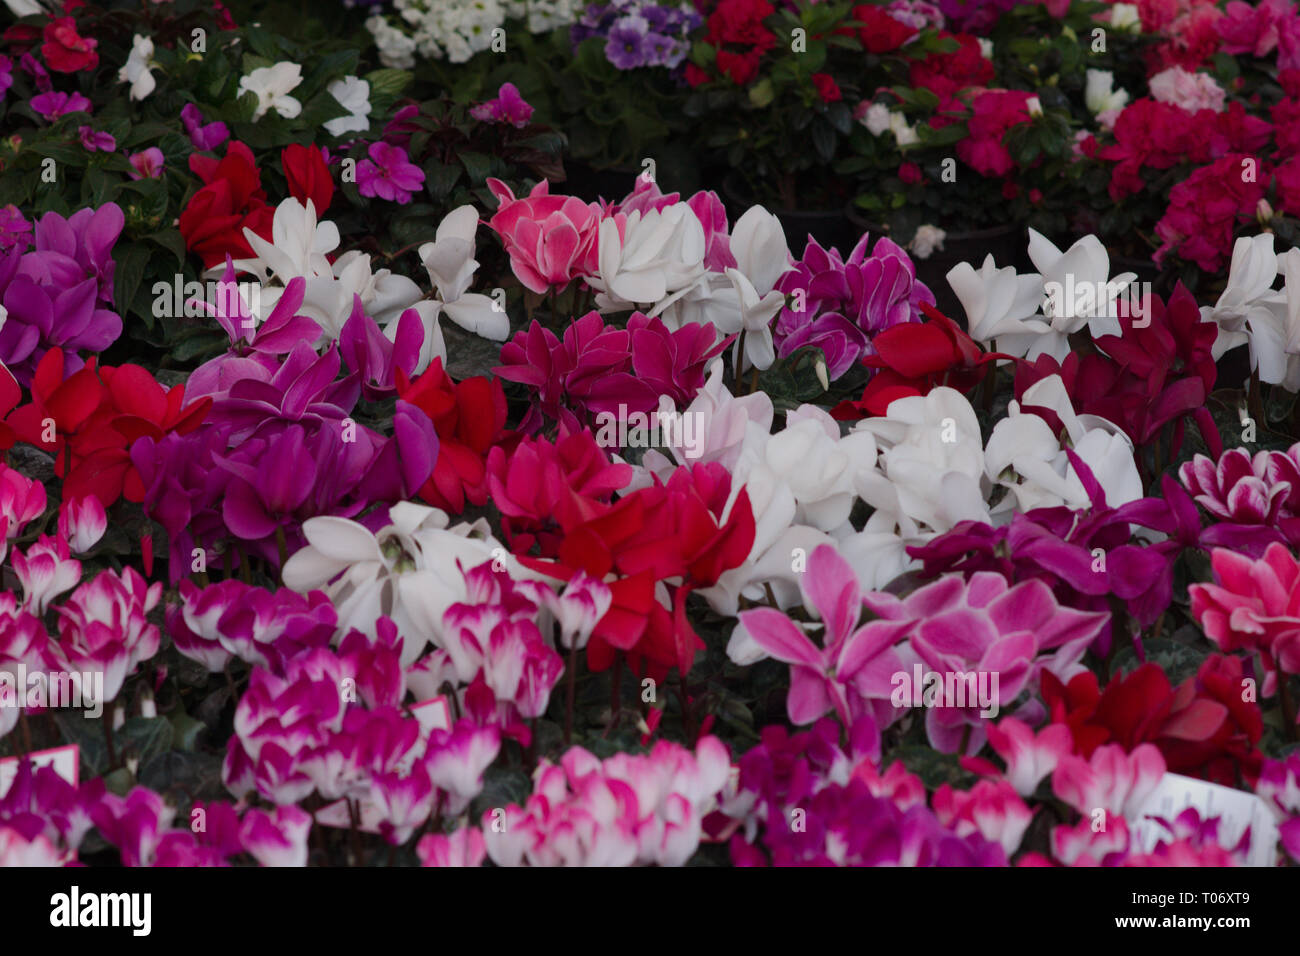 Field of red, pink, white, fuchsia cyclamen blooms from San Miguel de Allende Juarez Park Candelaria 2019 Stock Photo